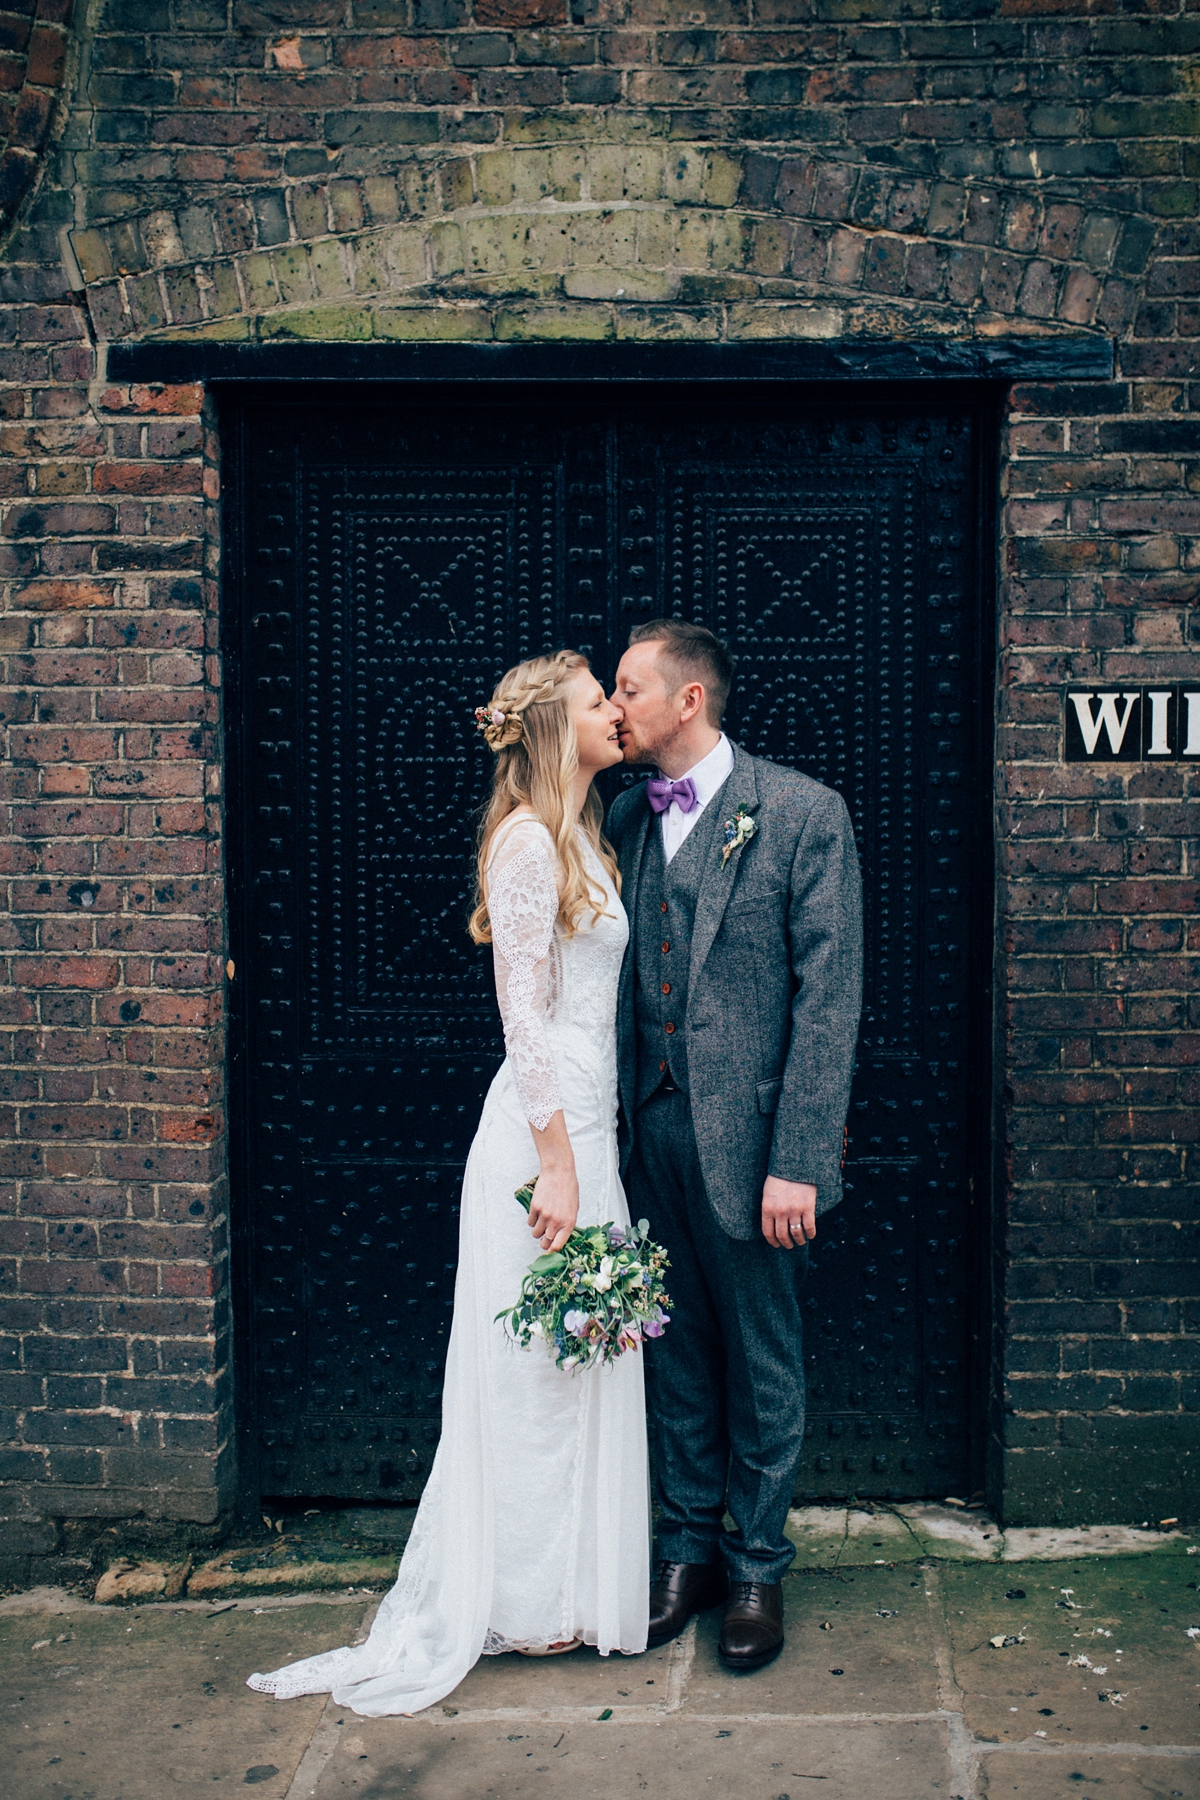 34 A Grace Loves Lace gown for a woodland inspired London pub wedding. Images by Nikki van der Molen